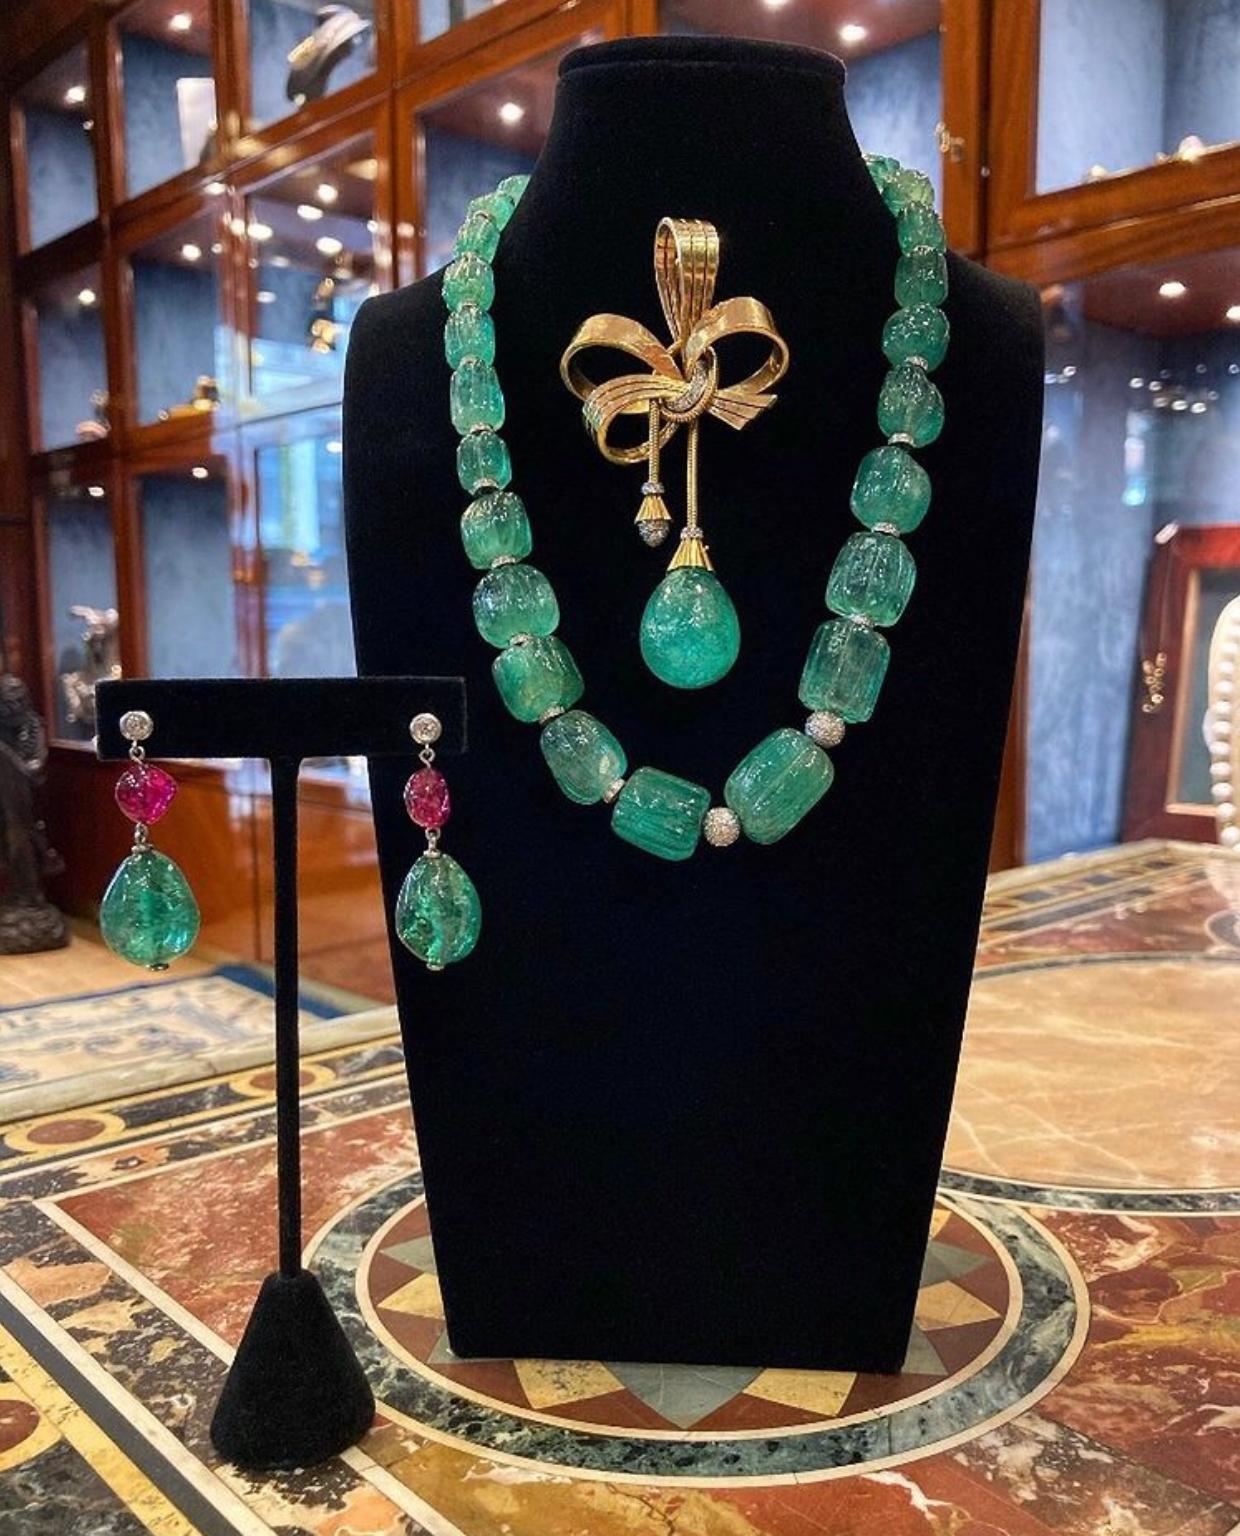 A mesmerizing necklace comprised of 470 carats of fluted Colombian emerald beads, and diamond spacers, accented by a Boucheron diamond and pearl clasp.